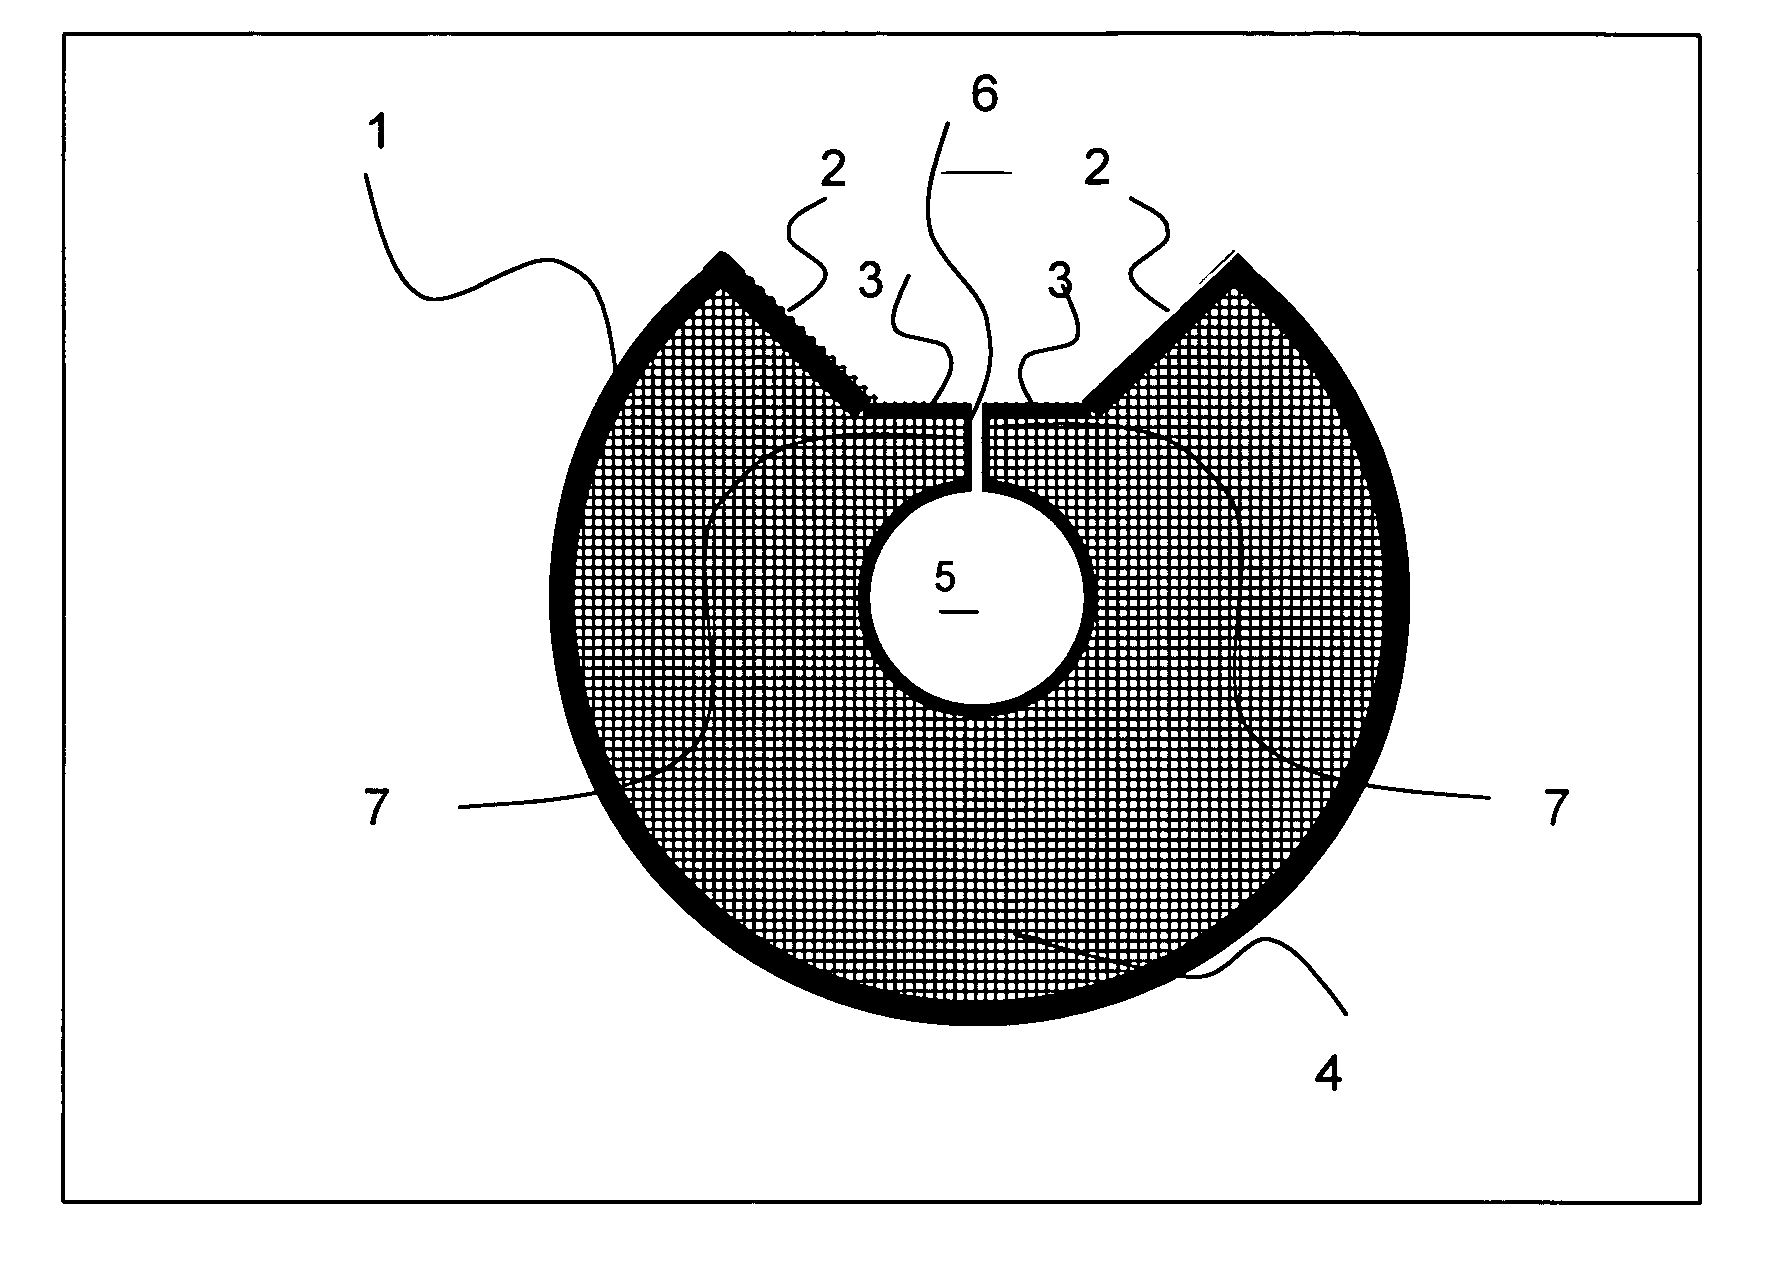 Plant delivery apparatus and method